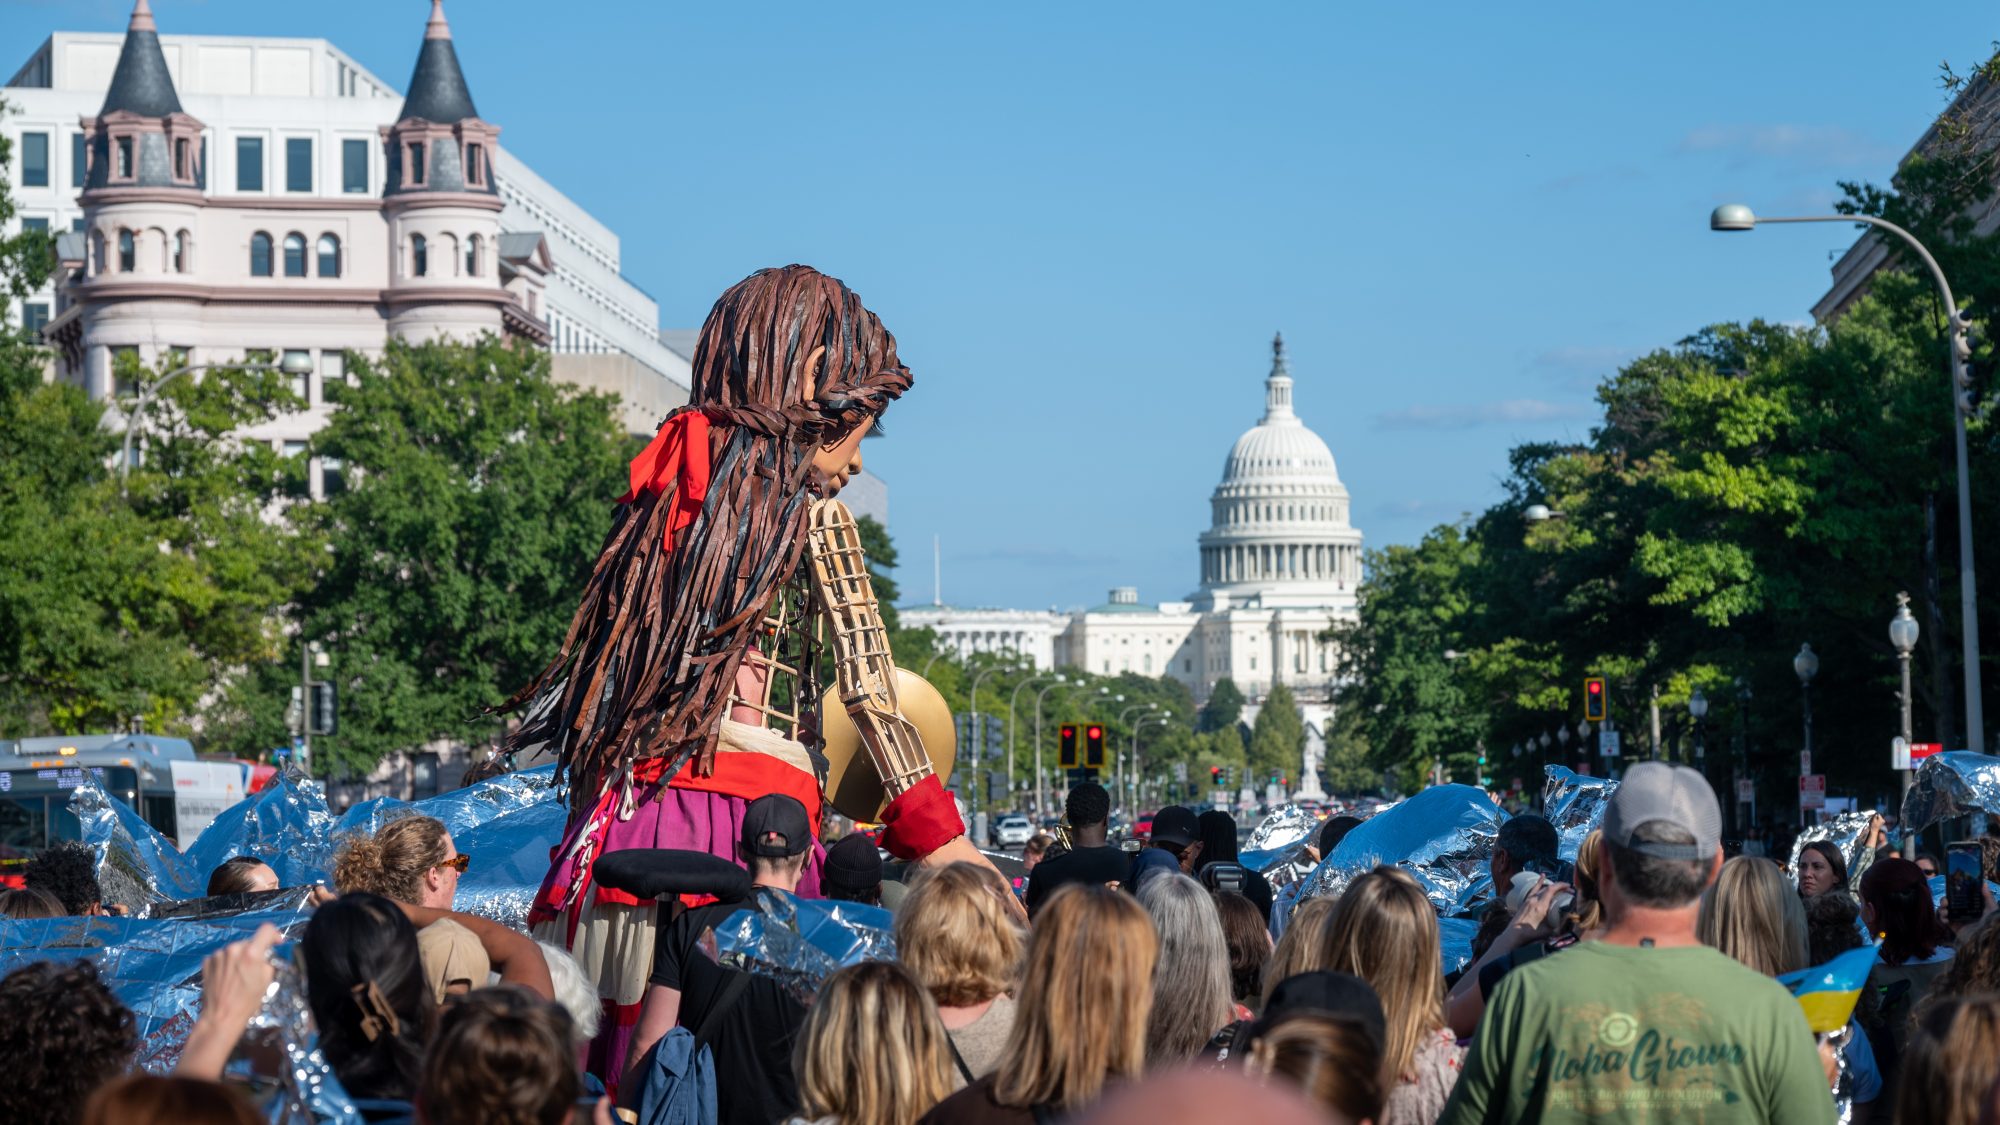 Little Amal, a puppet made to resemble a 10-year-old Syrian refugee, walks in a crowd toward the U.S. Capitol in the distance.